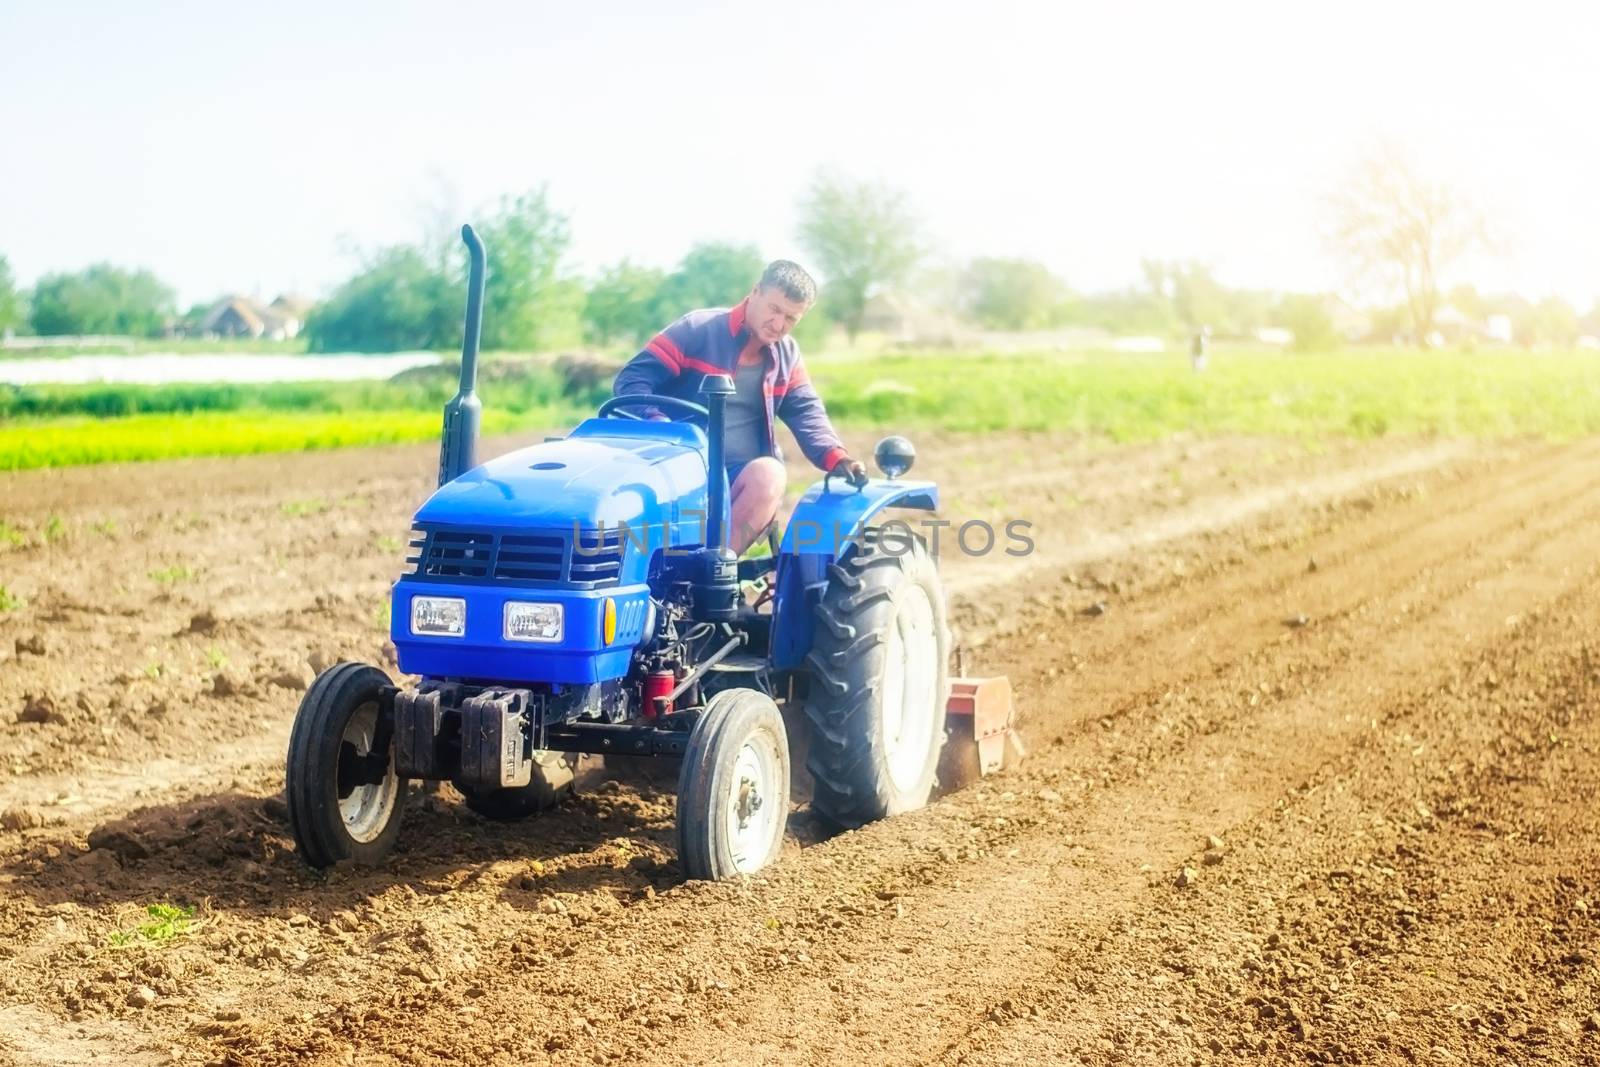 A farmer on a tractor cultivates a farm field. Agriculture, growing organic food vegetables. Soil milling, crumbling and mixing. Loosening the surface, cultivating the land for further planting.